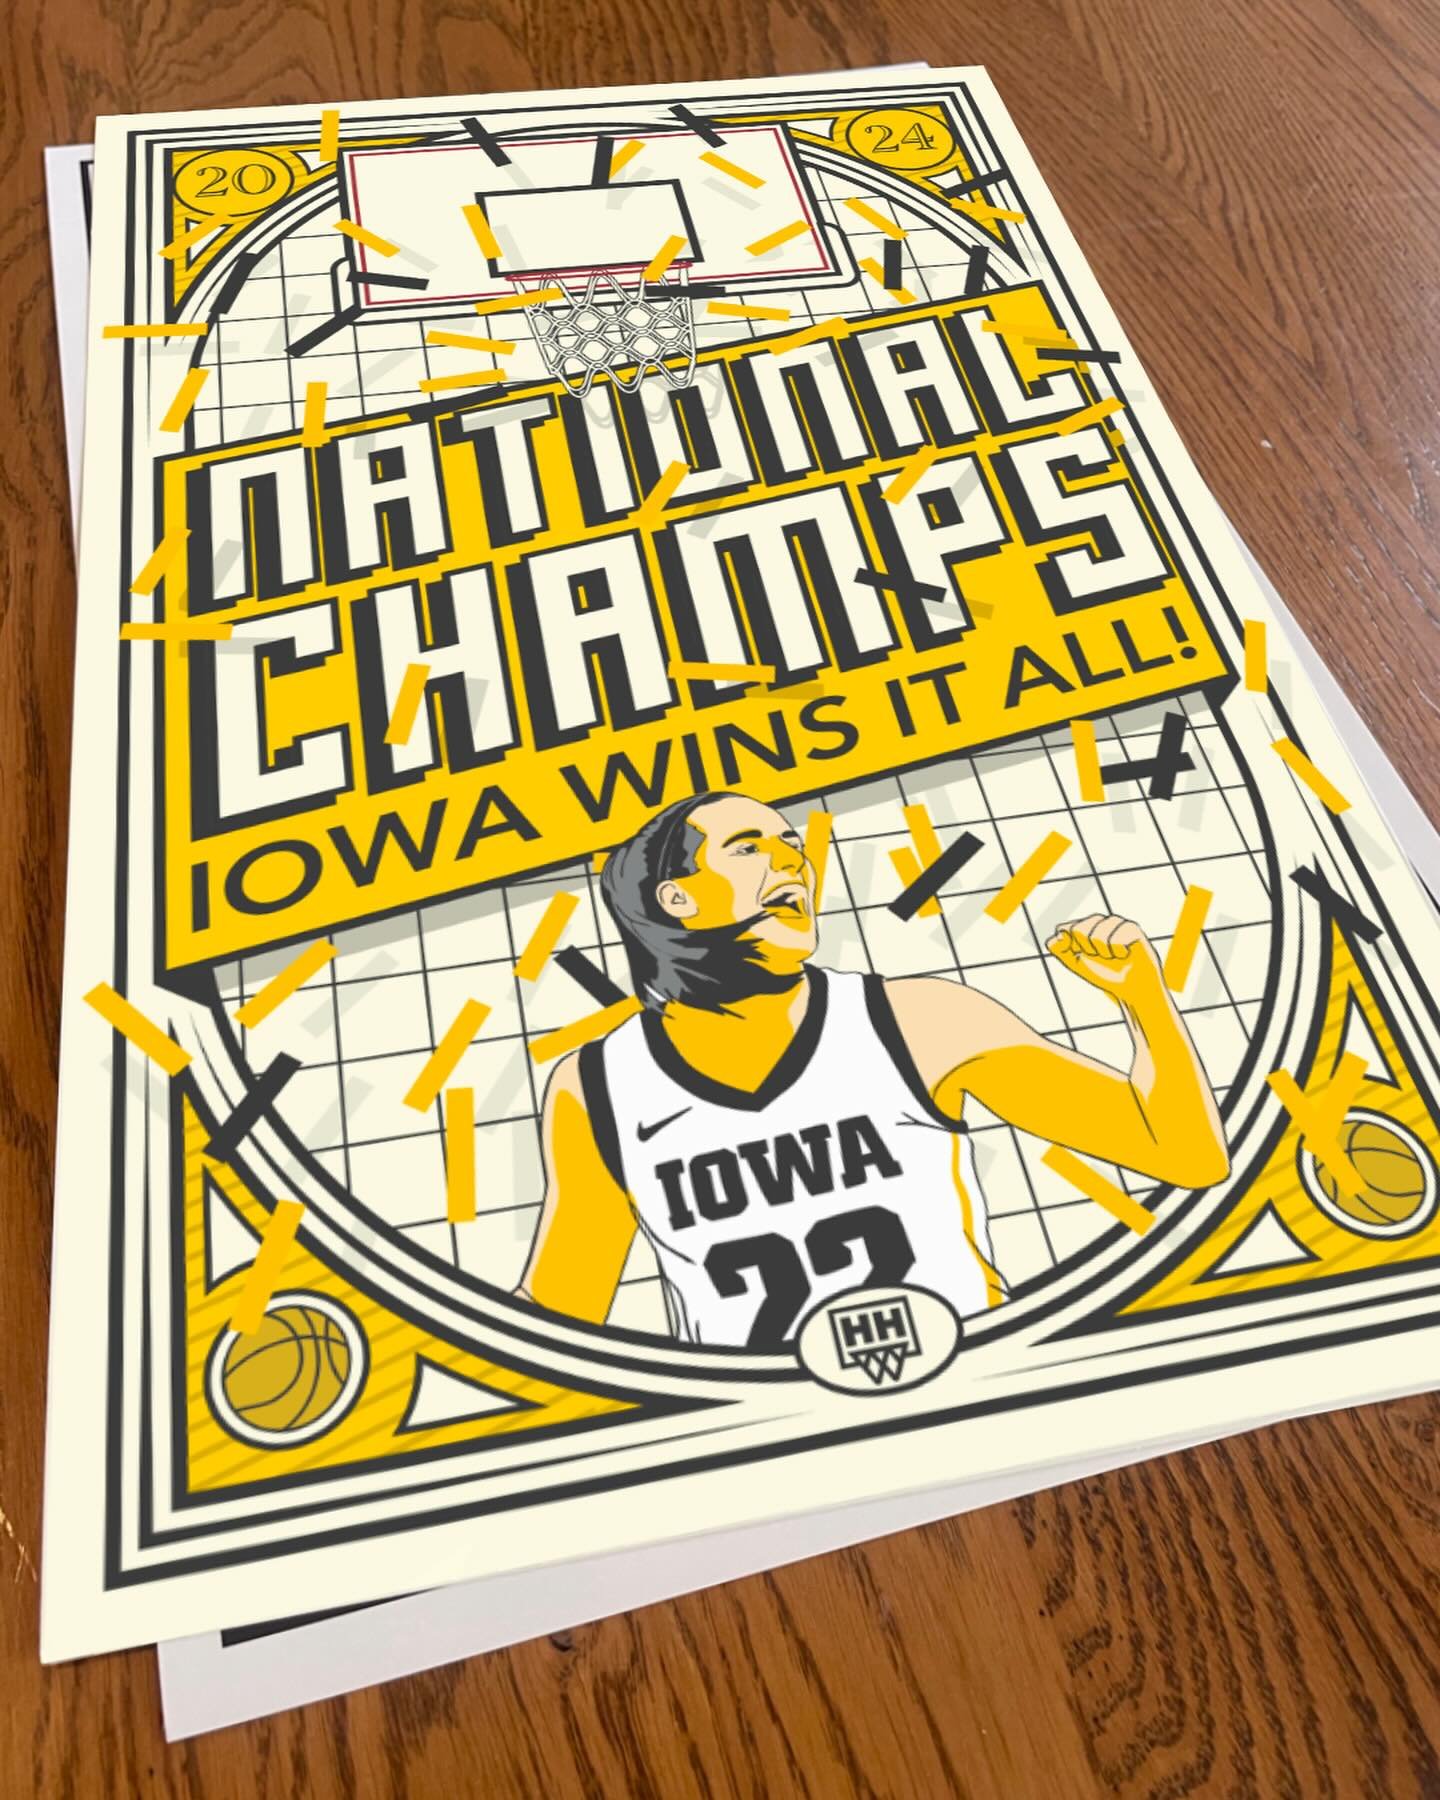 I took a gamble and made this poster a couple weeks ago&hellip; if you or someone you know wants a copy of the only Iowa National Champs poster in your friend group, send me a DM 

I actually drew this @caitlinclark22 portrait in an absurdly short am